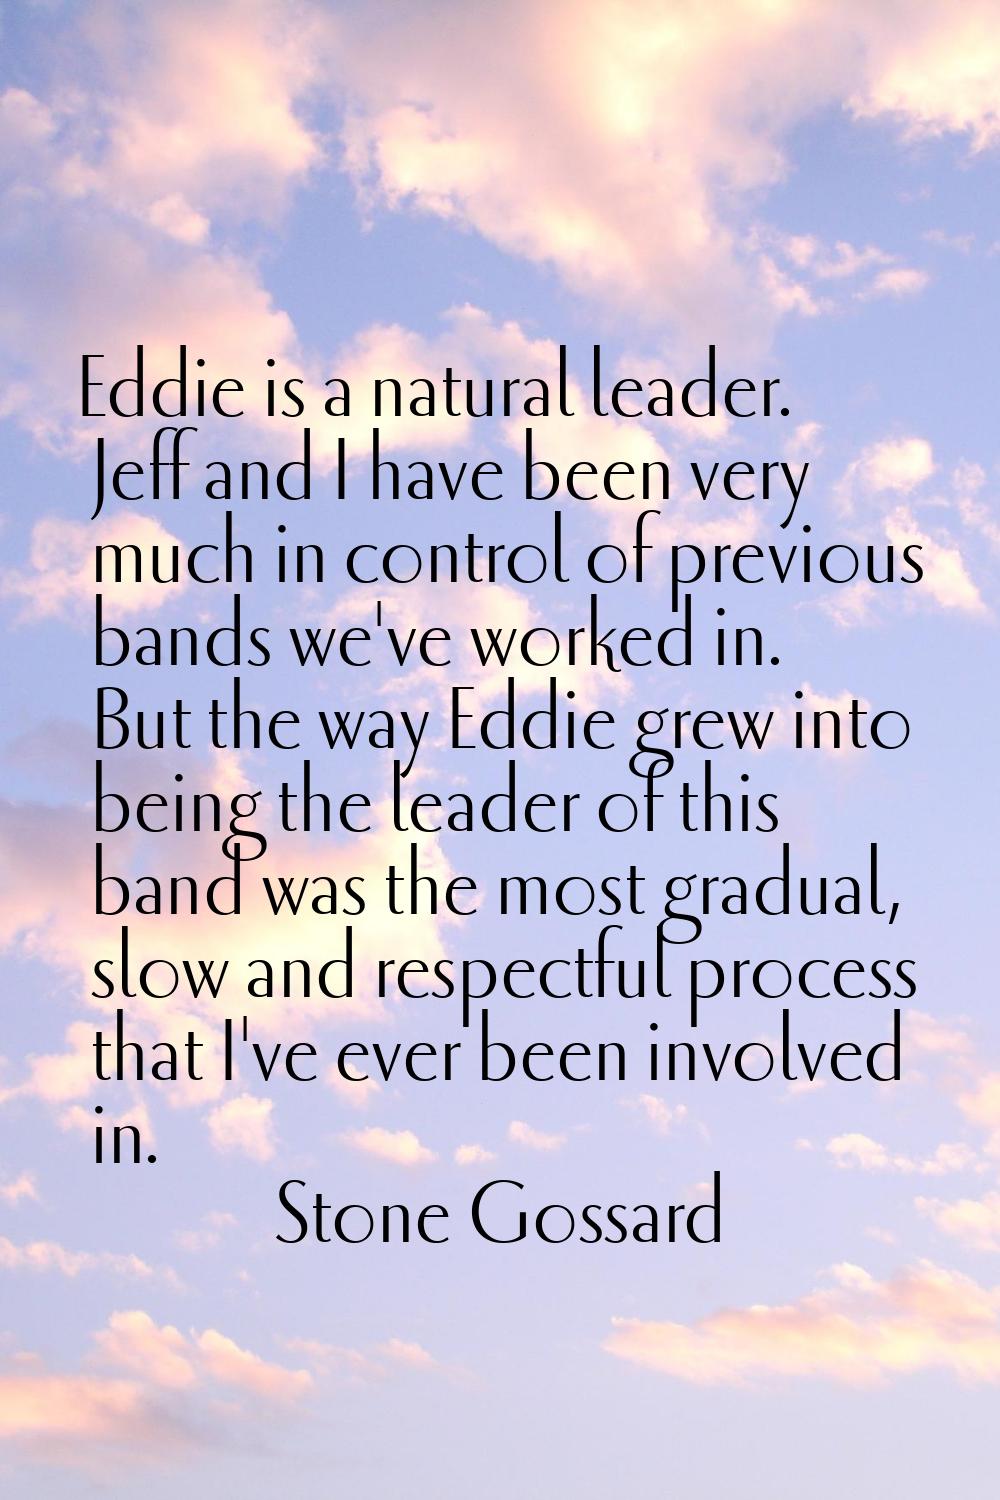 Eddie is a natural leader. Jeff and I have been very much in control of previous bands we've worked